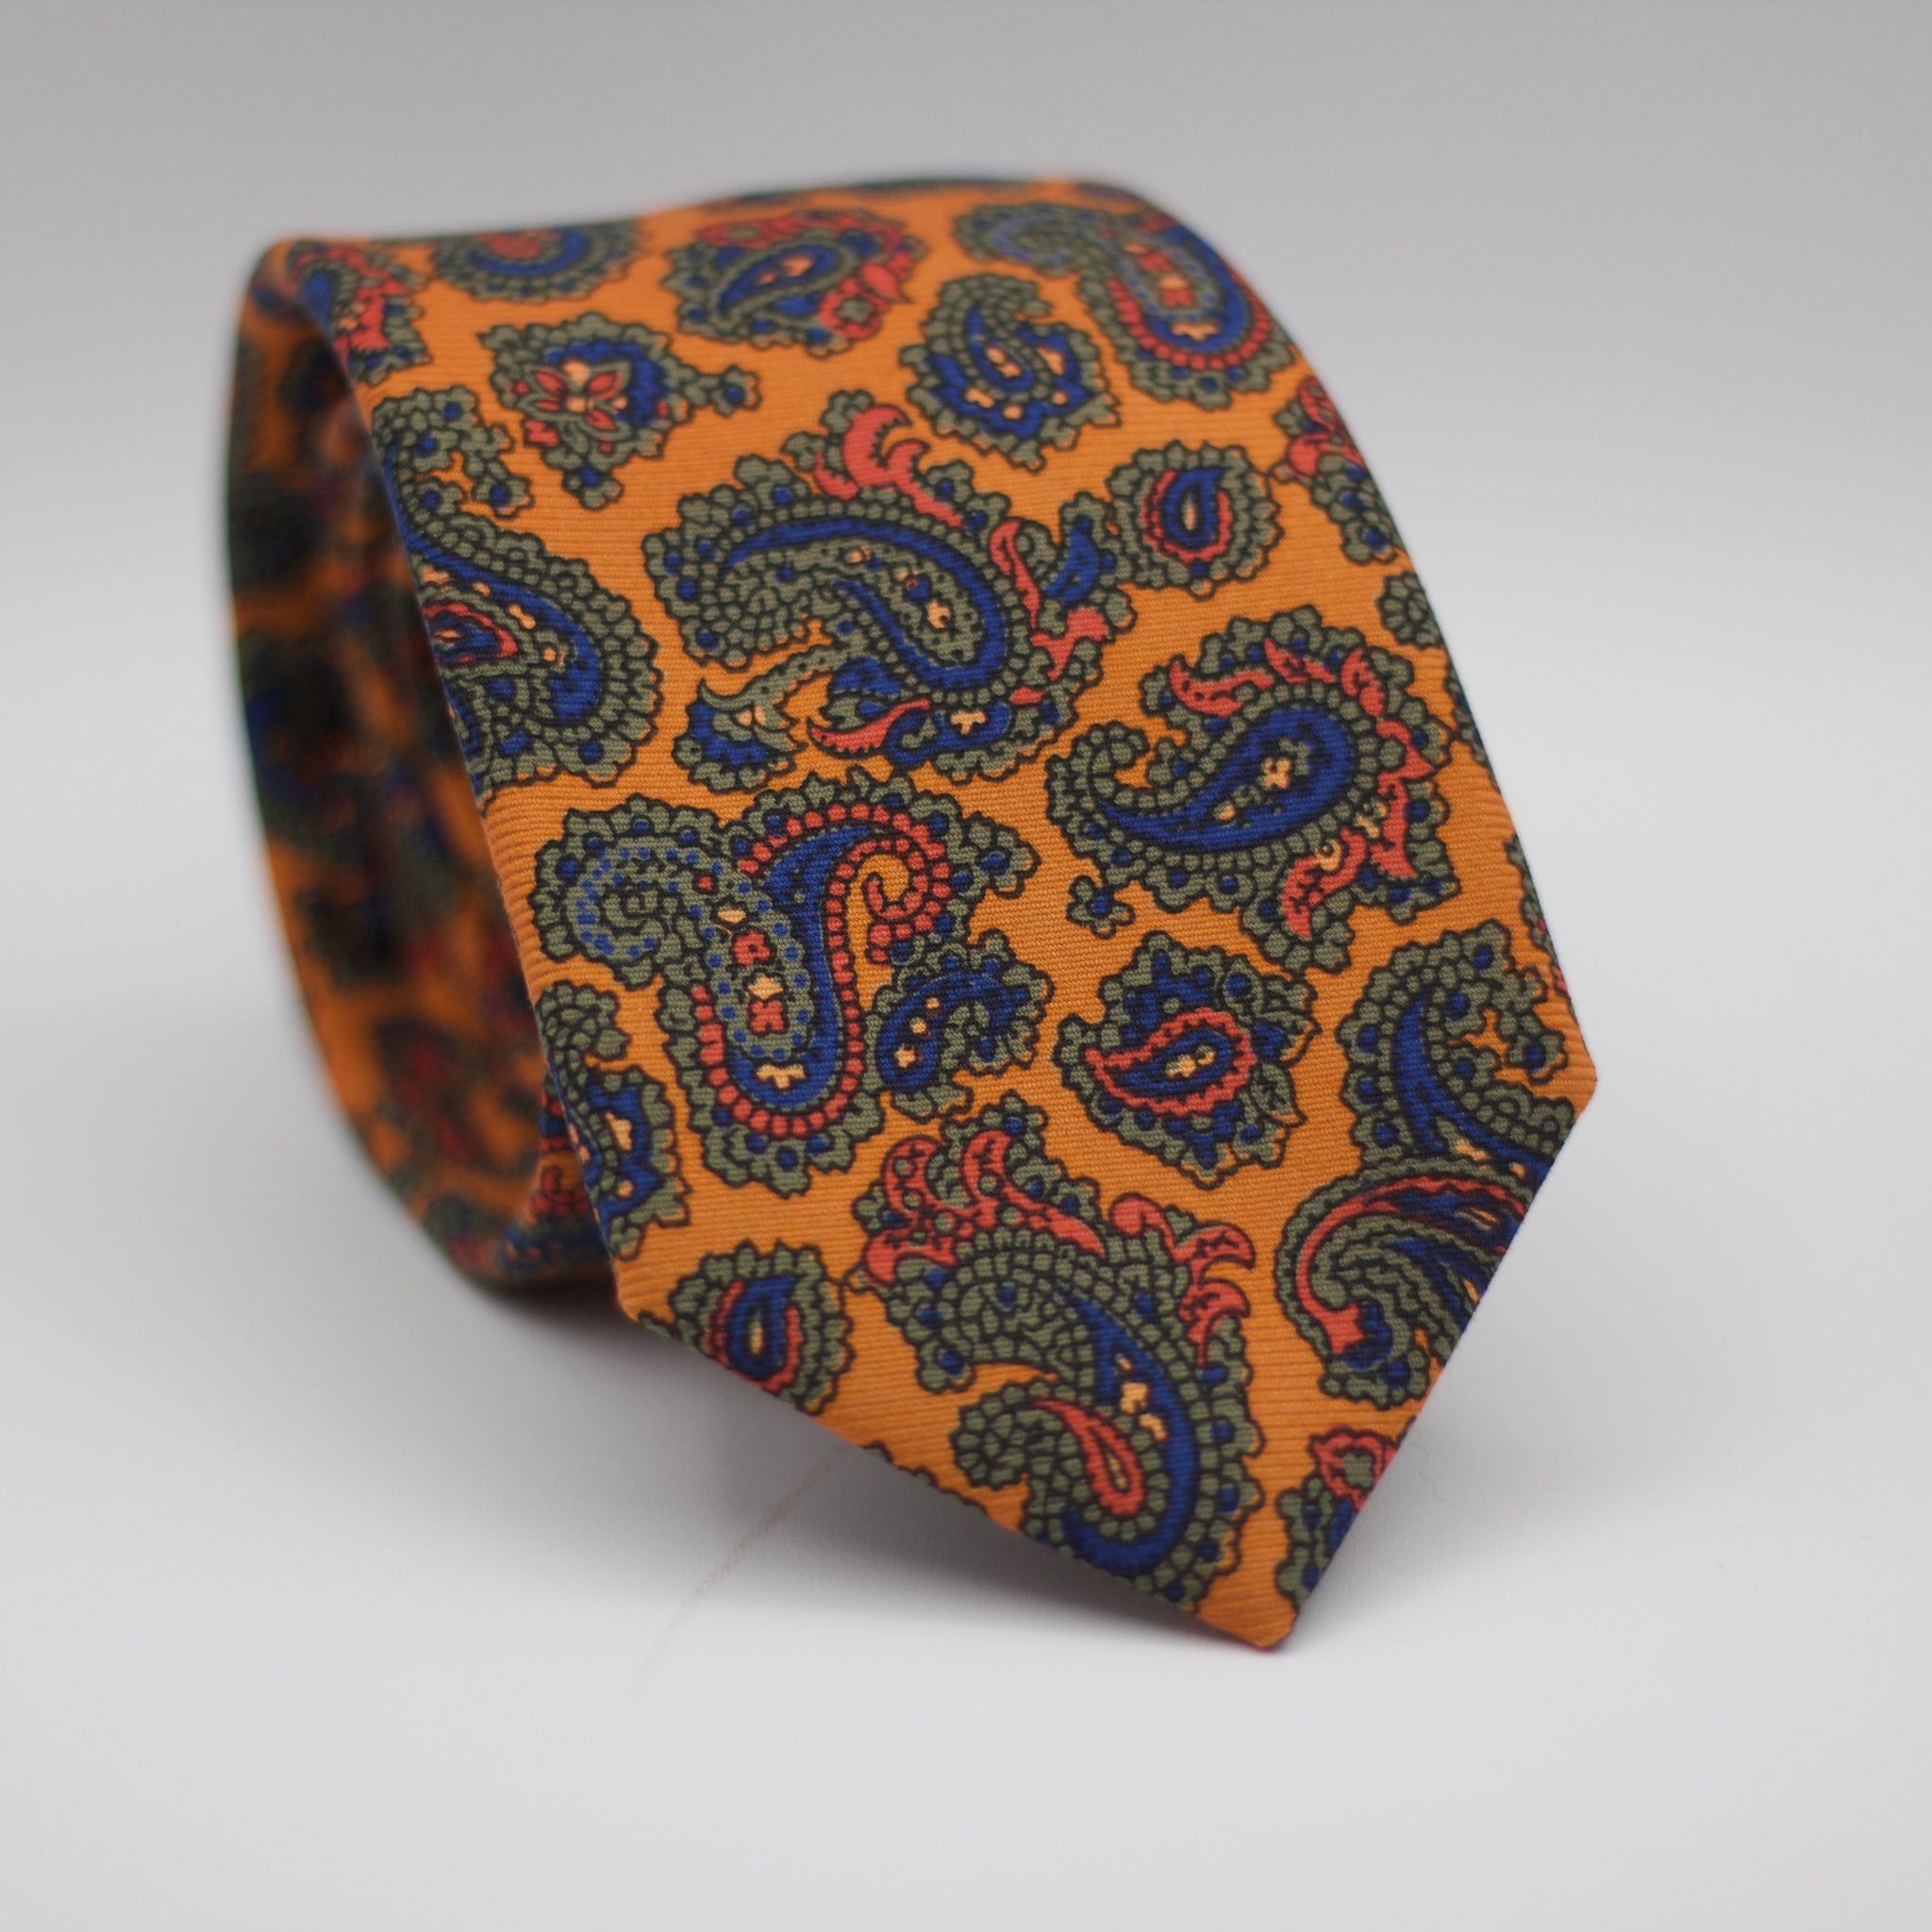 Holliday & Brown for Cruciani & Bella 100% printed Silk Self tipped Orange with Blue, Green and Red paisley motif tie Handmade in Italy 8 cm x 150 cm #5076